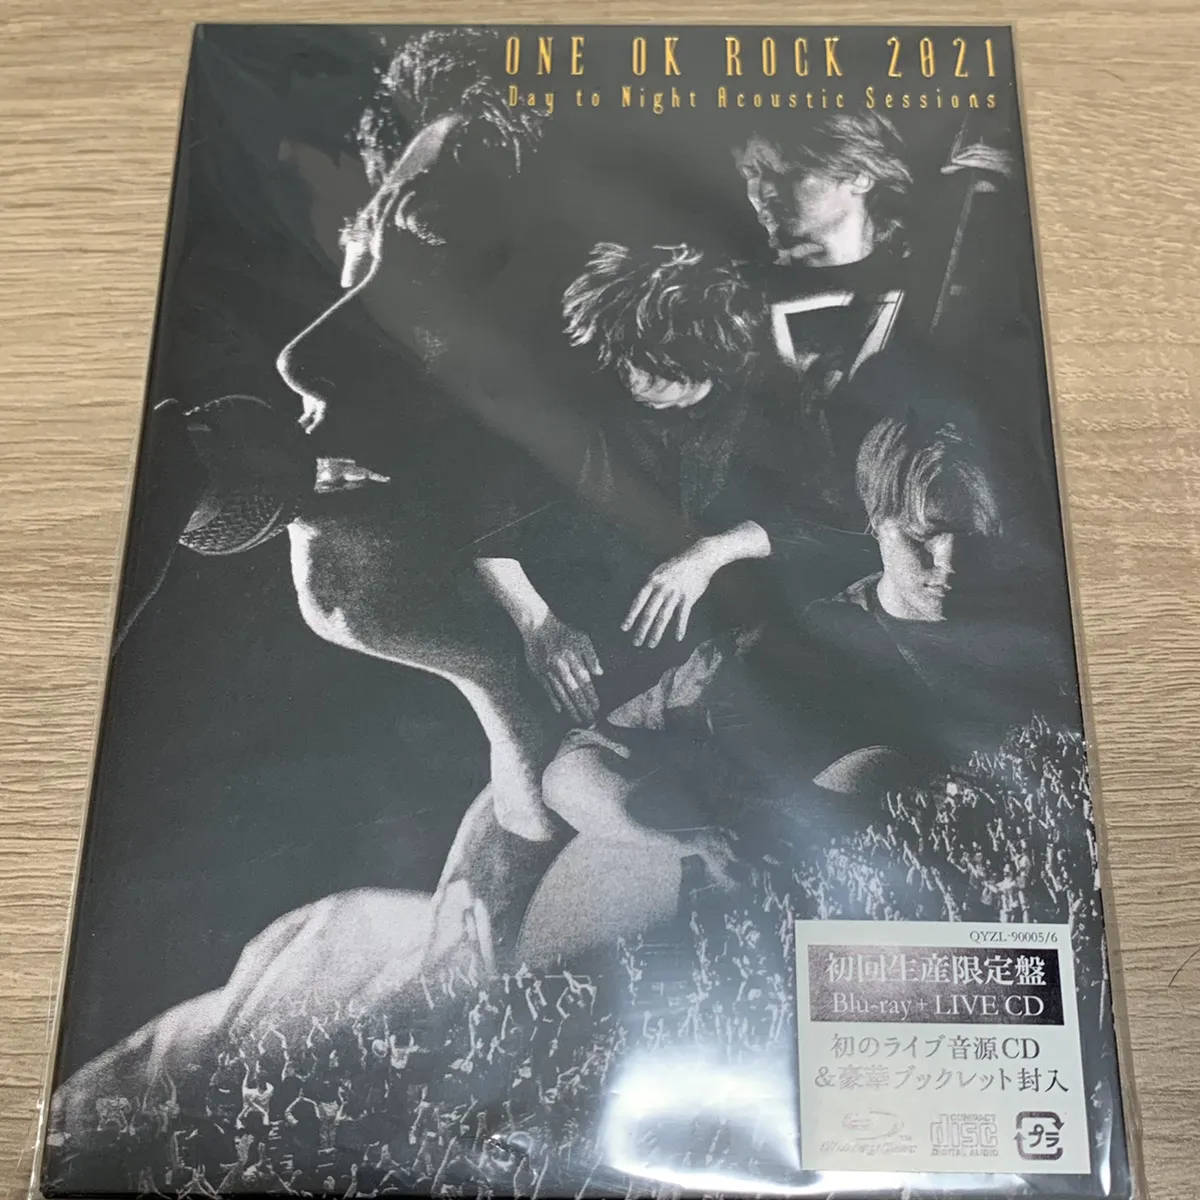 ONE OK ROCK 2021 Day to Night Acoustic Sessions Blu-ray 初回生産限定盤